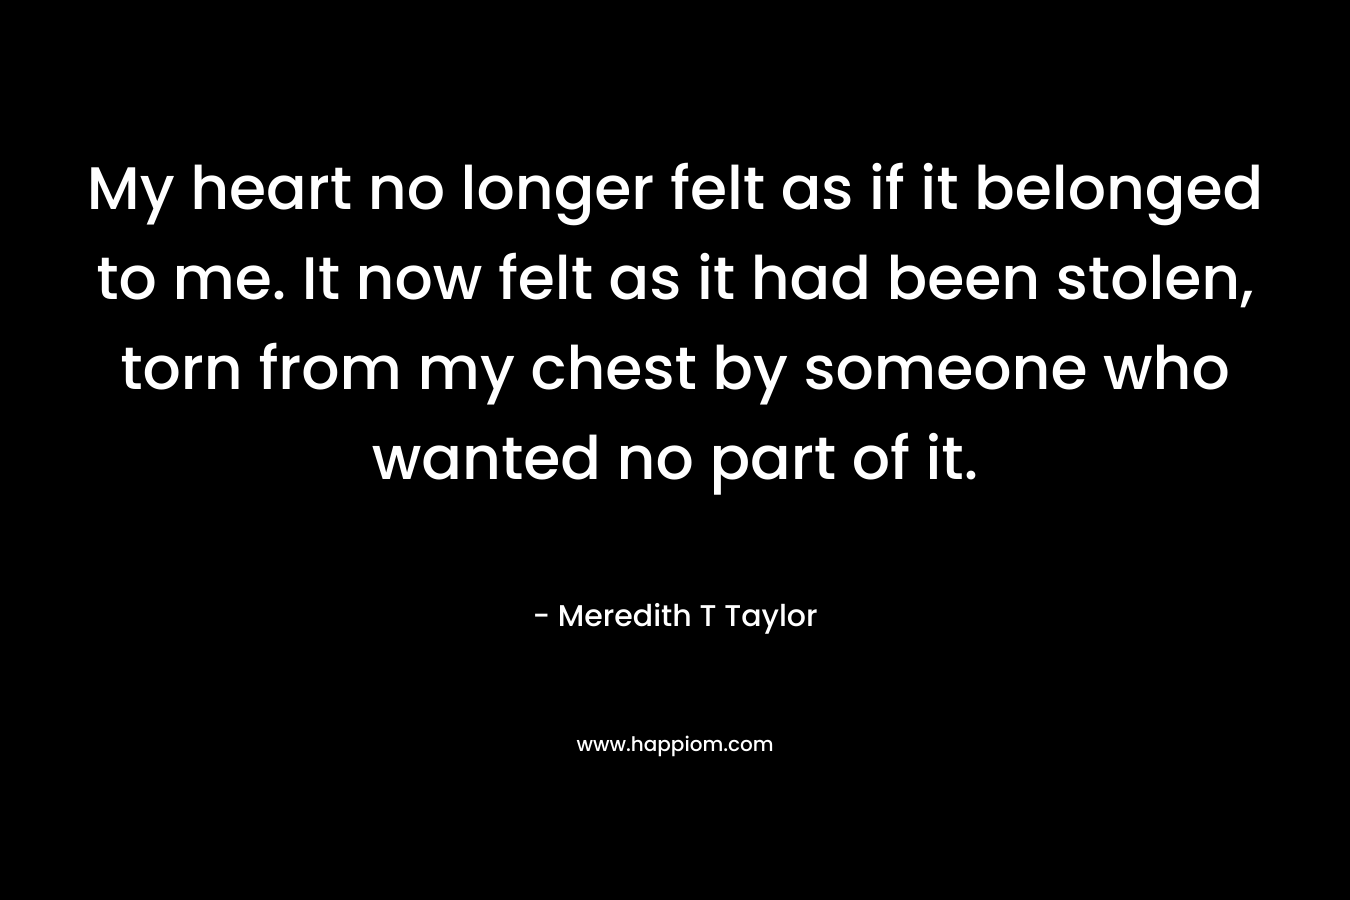 My heart no longer felt as if it belonged to me. It now felt as it had been stolen, torn from my chest by someone who wanted no part of it.